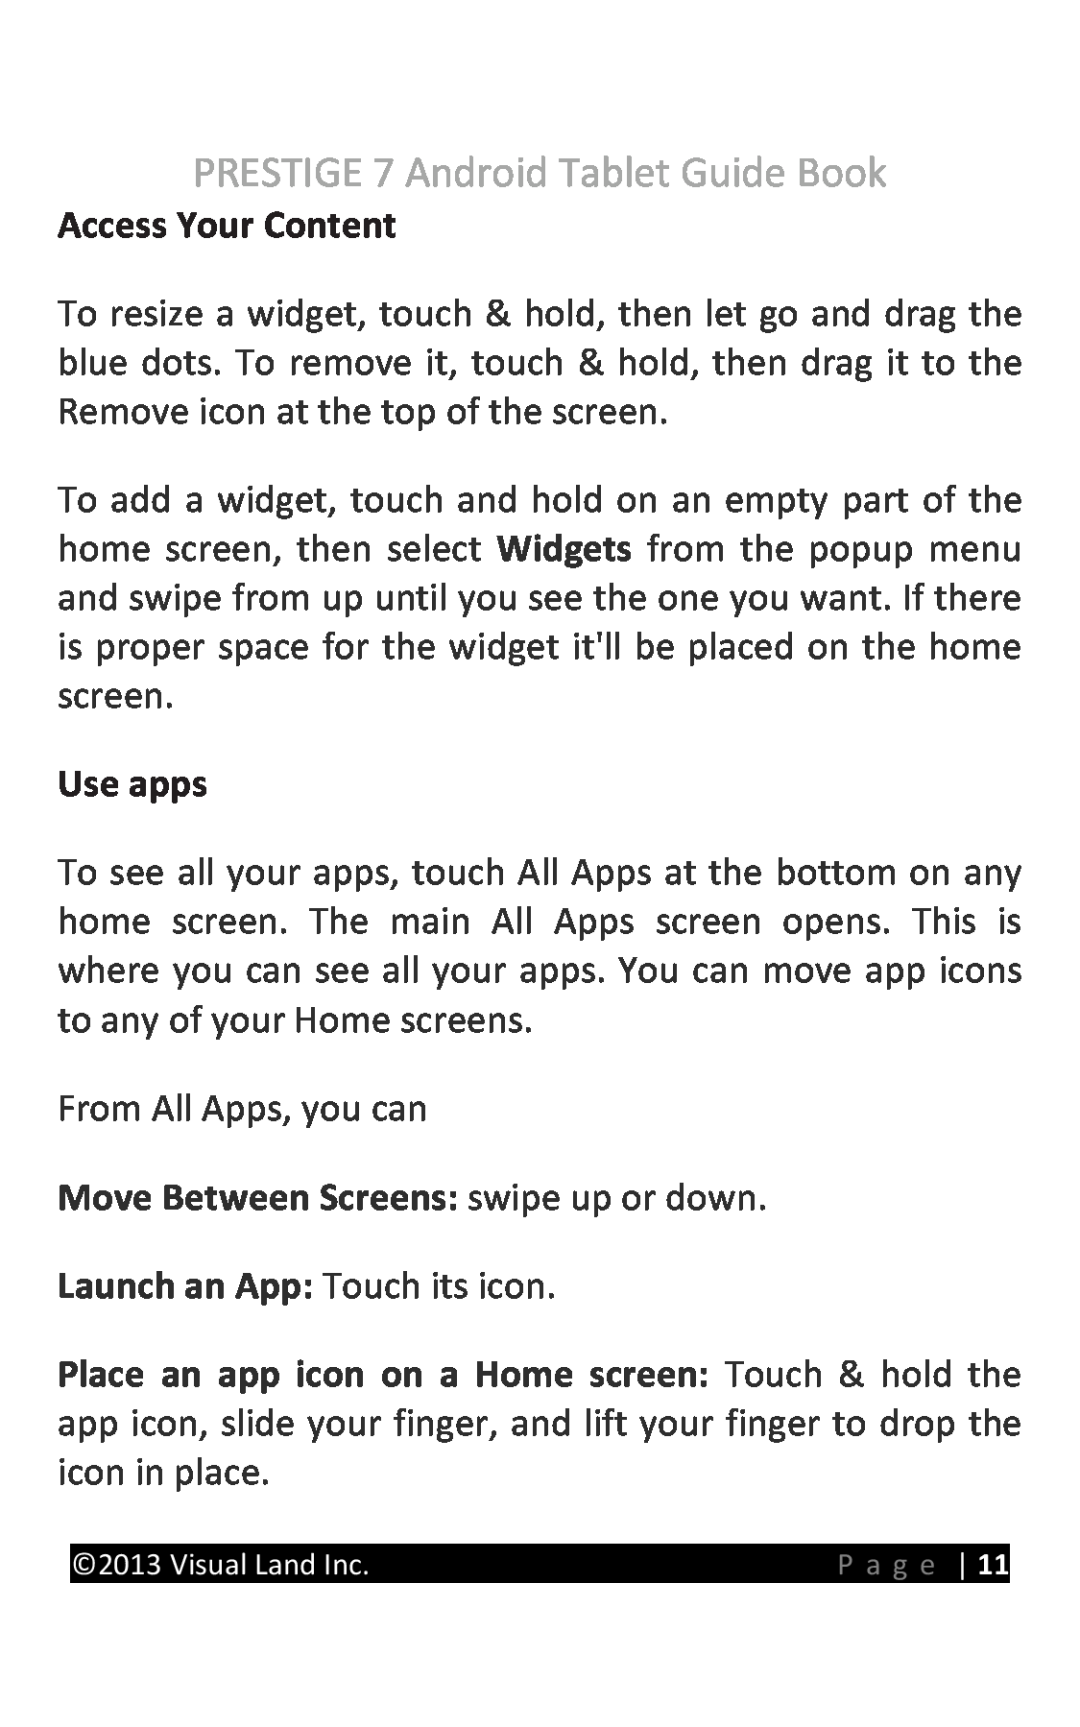 Visual Land 7D8TCBLK Access Your Content, Use apps, Move Between Screens swipe up or down Launch an App Touch its icon 